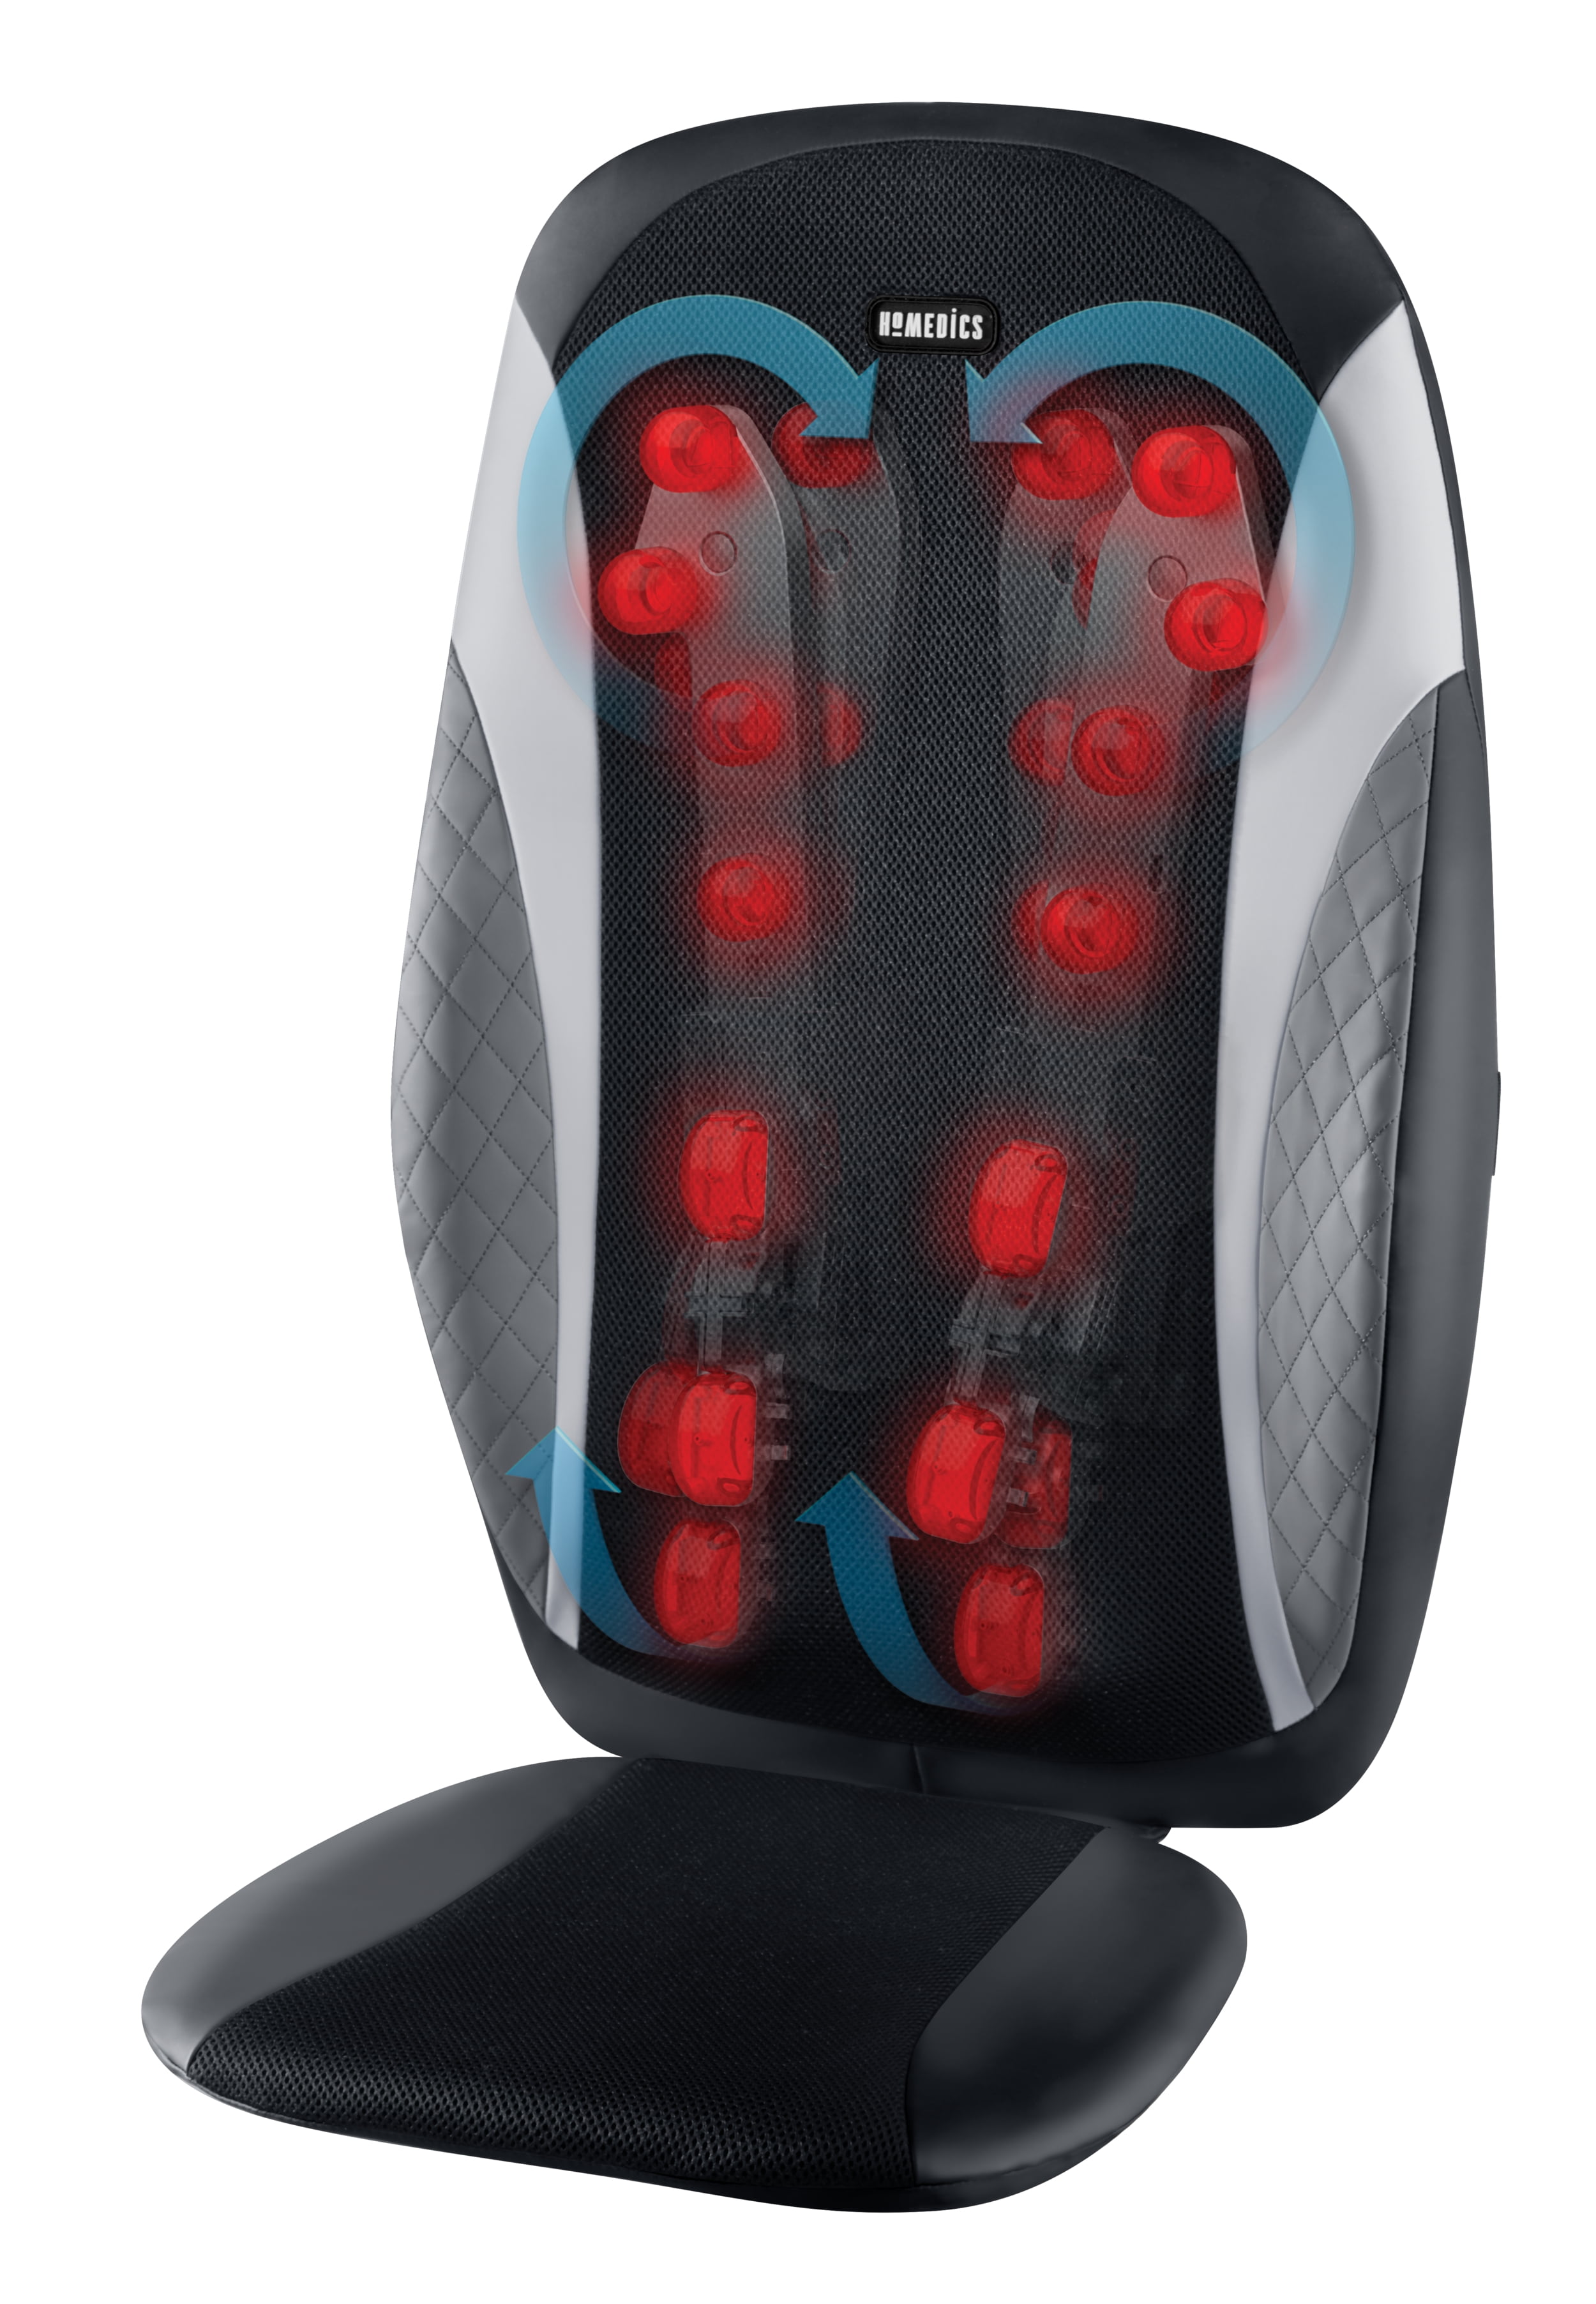 Homedics Back and Neck Massager, Portable Shiatsu All Body Massage Pillow  with Heat, Targets Upper and Lower Back, Neck and Shoulders. Lightweight  for Travel - Yahoo Shopping